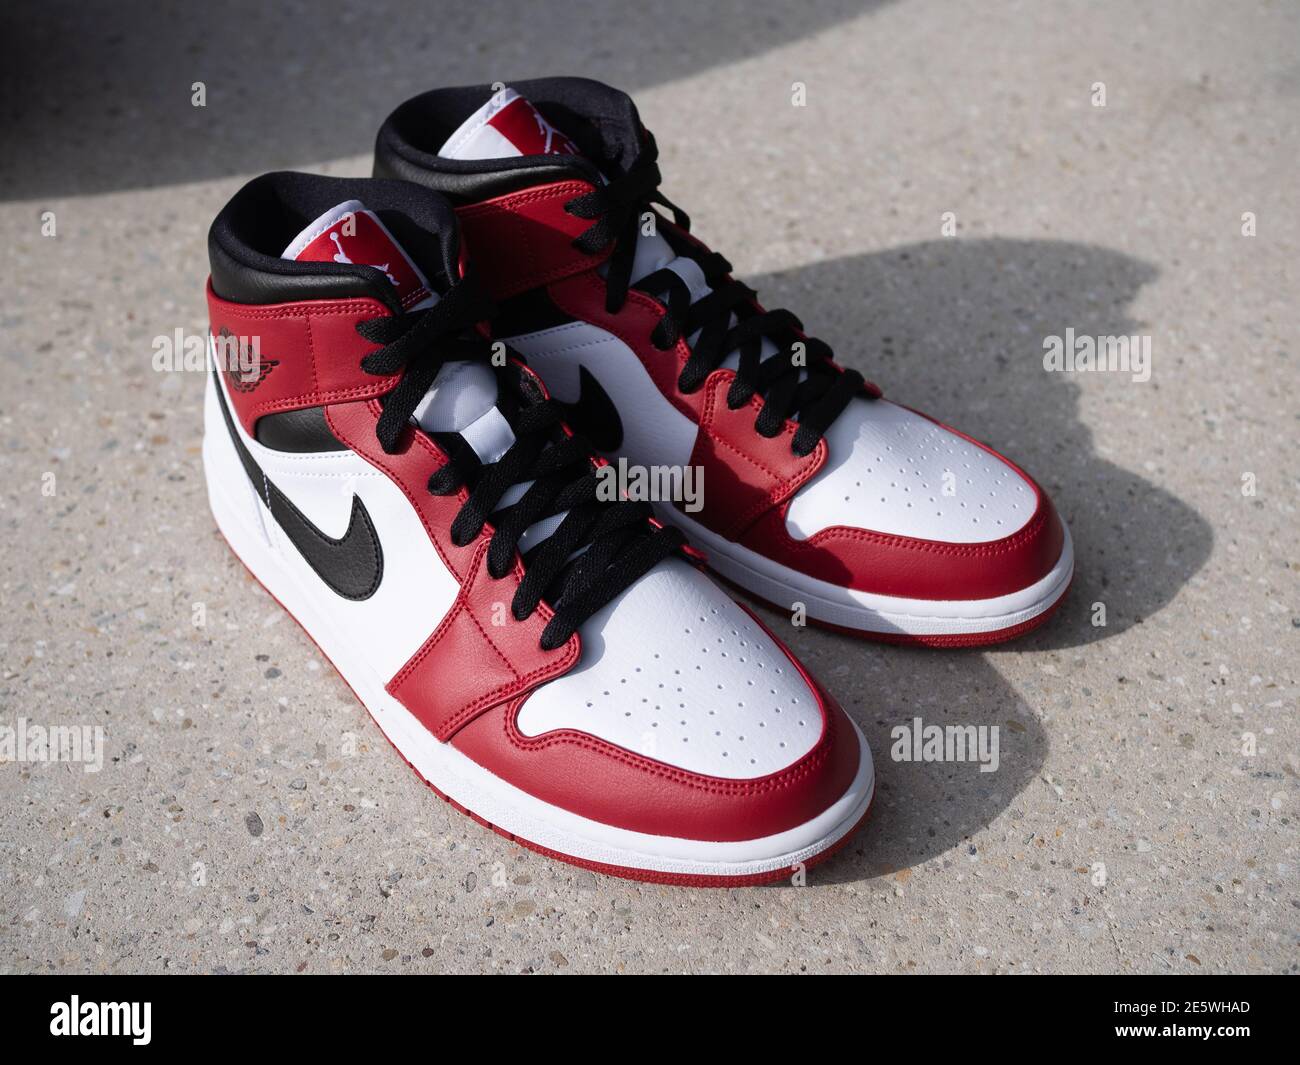 Nike Air Jordan 1 High Resolution Stock Photography and Images - Alamy